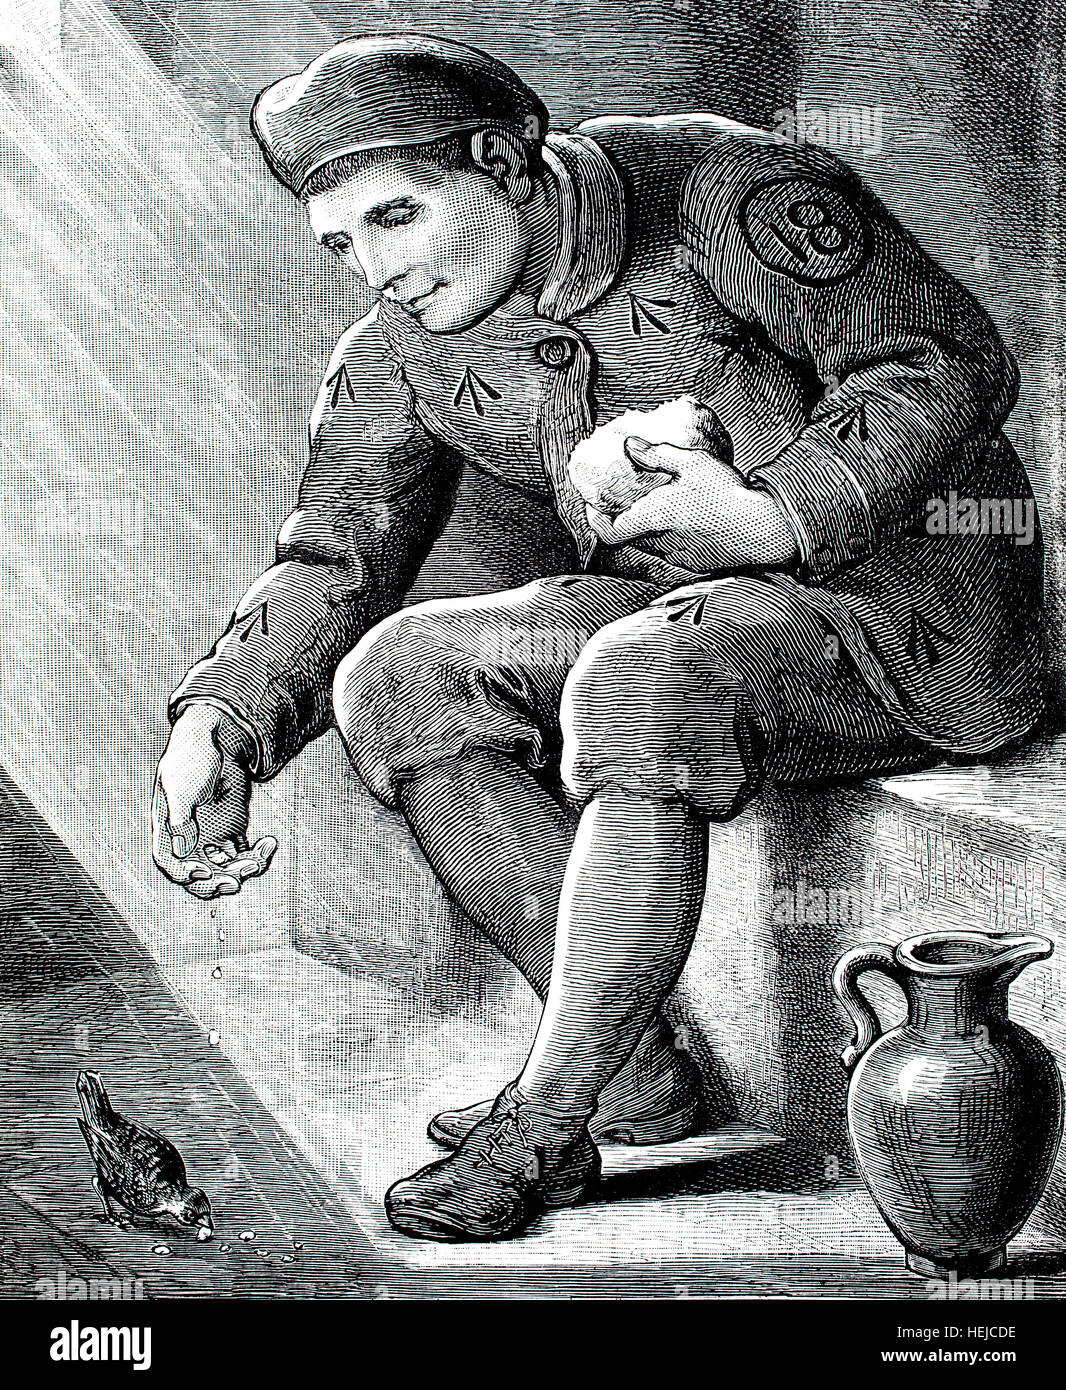 Victorian convict feeding bird in cell, illustration from 1884 Chatterbox weekly children’s paper Stock Photo